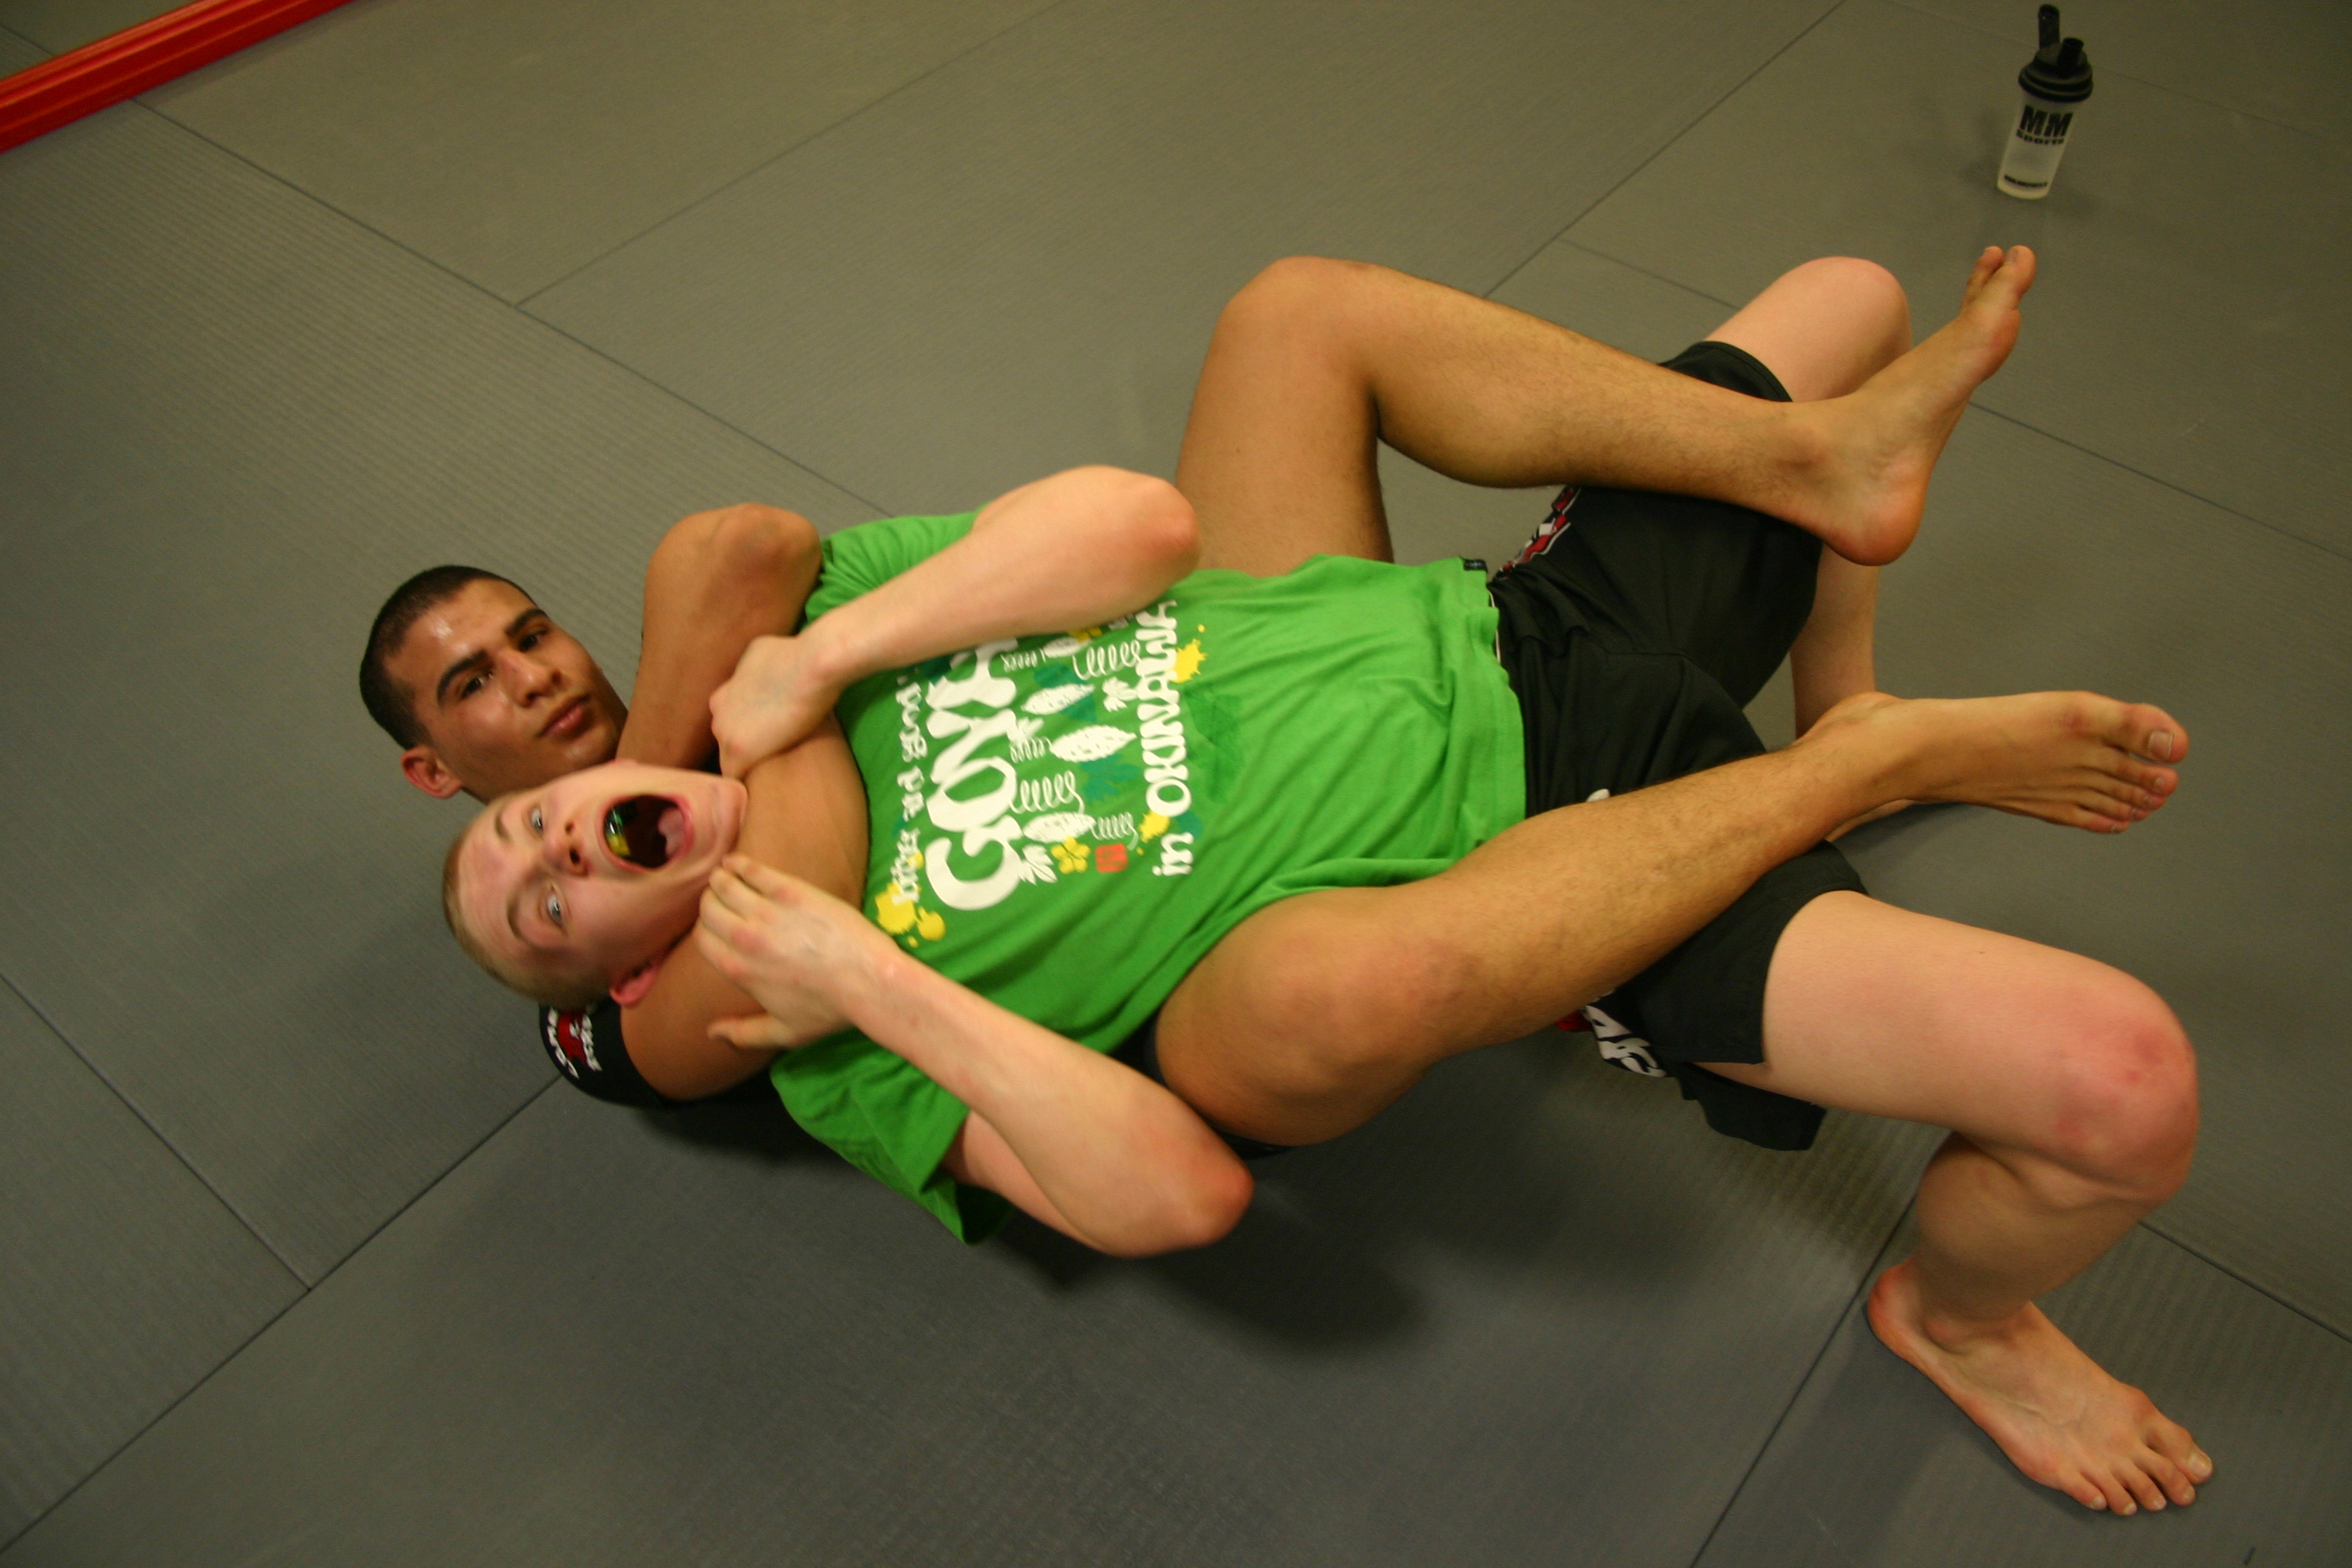 Release from a rear naked choke hold #1 